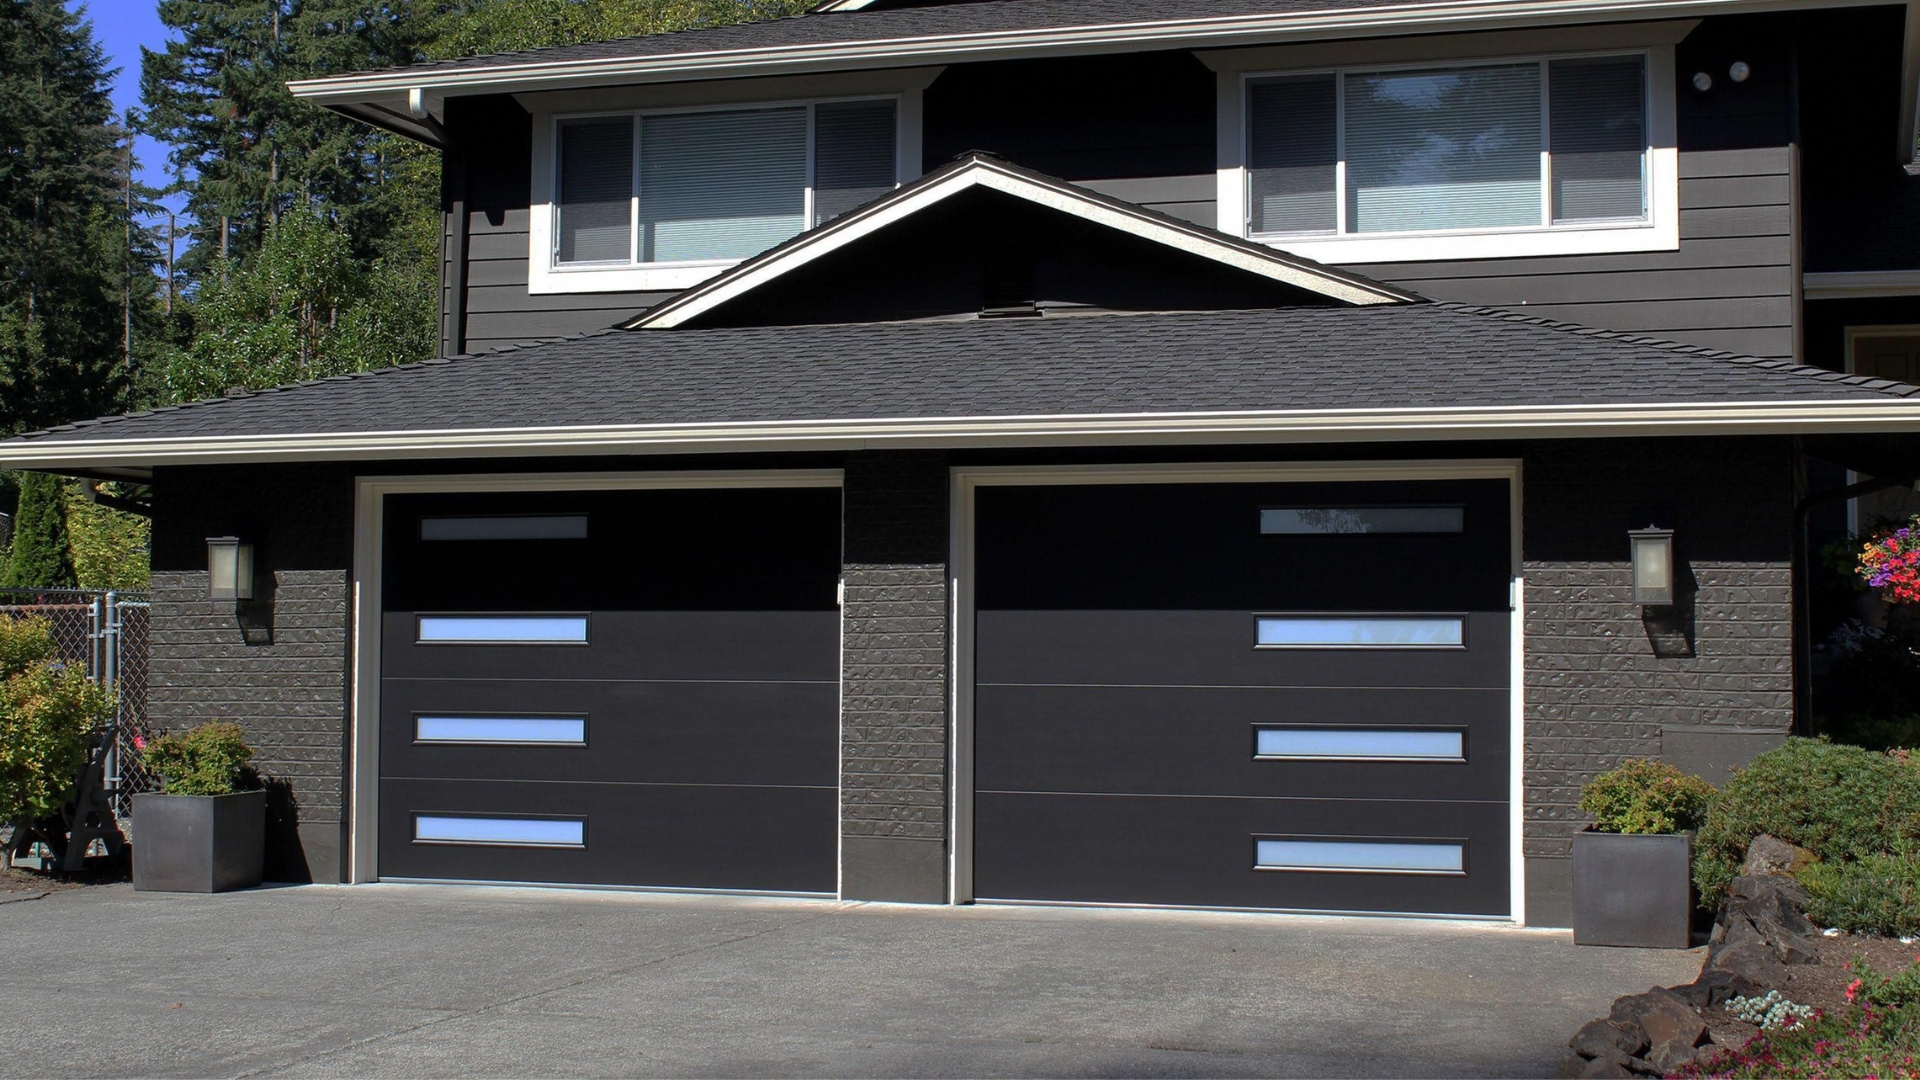 A house with black colored garage doors